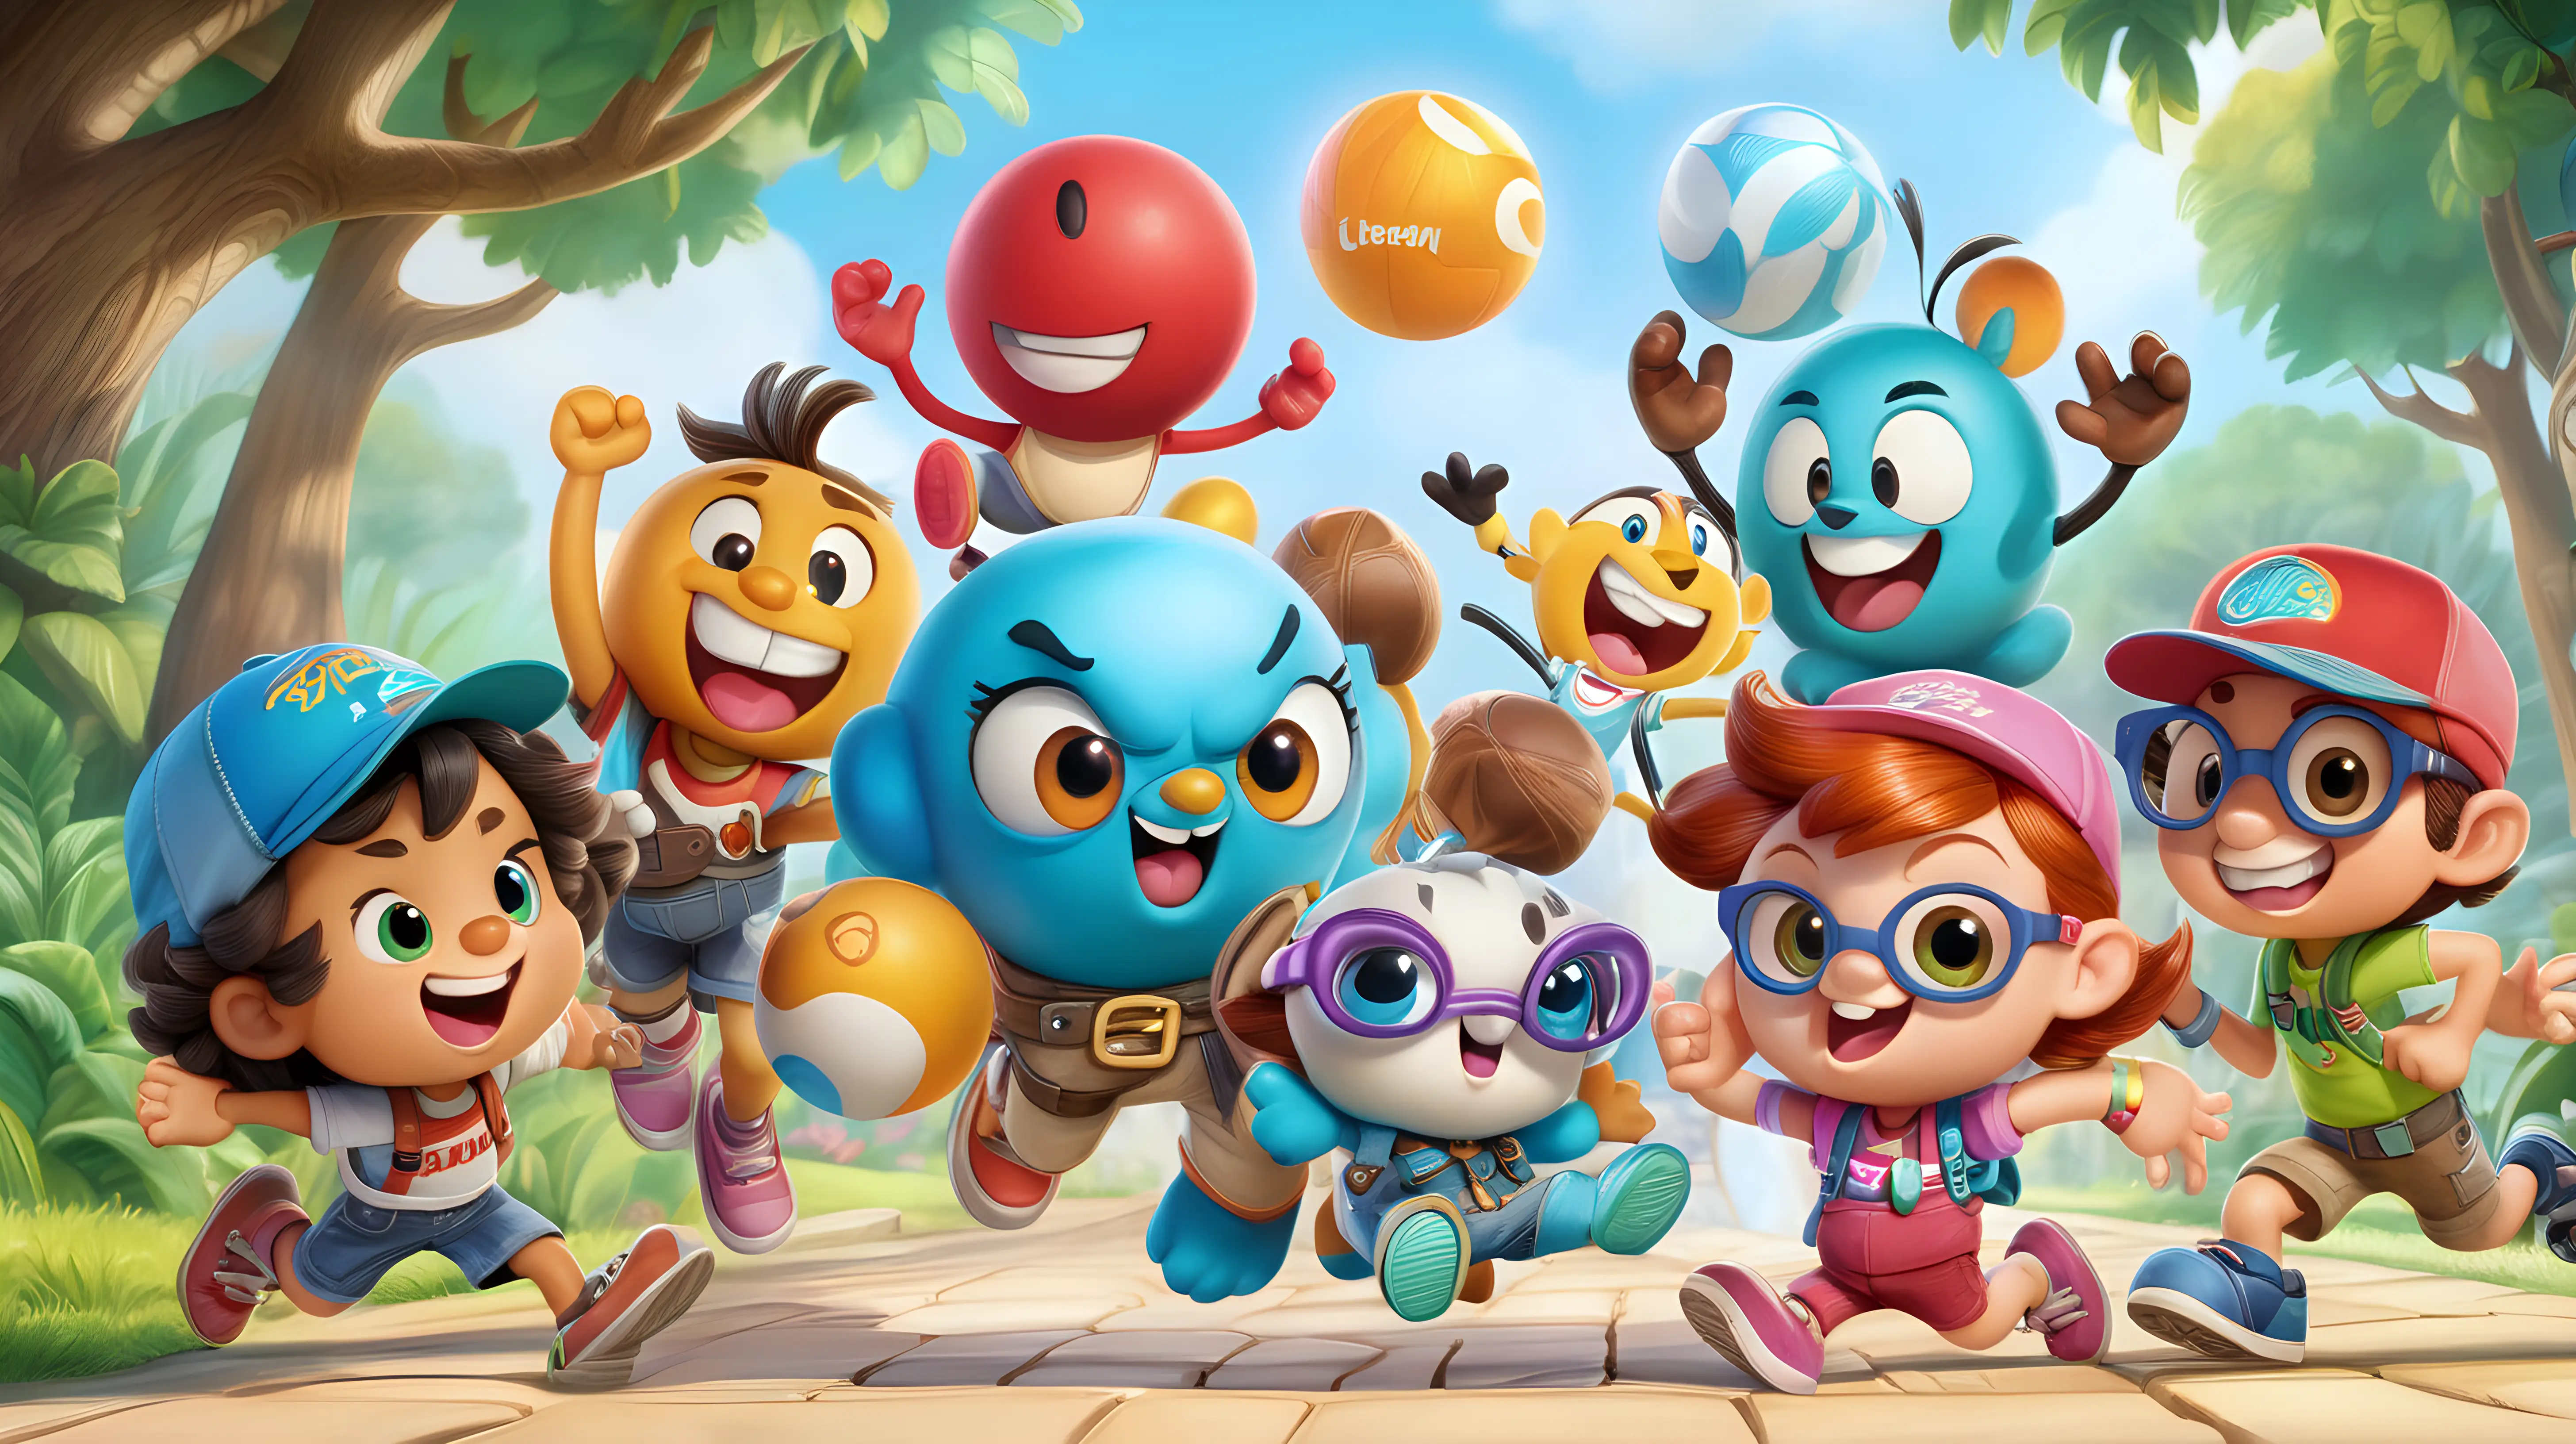 "Craft a lovable character that is a living, bouncing ball of energy, always ready for adventure and laughter, bringing boundless joy to the cartoon world."